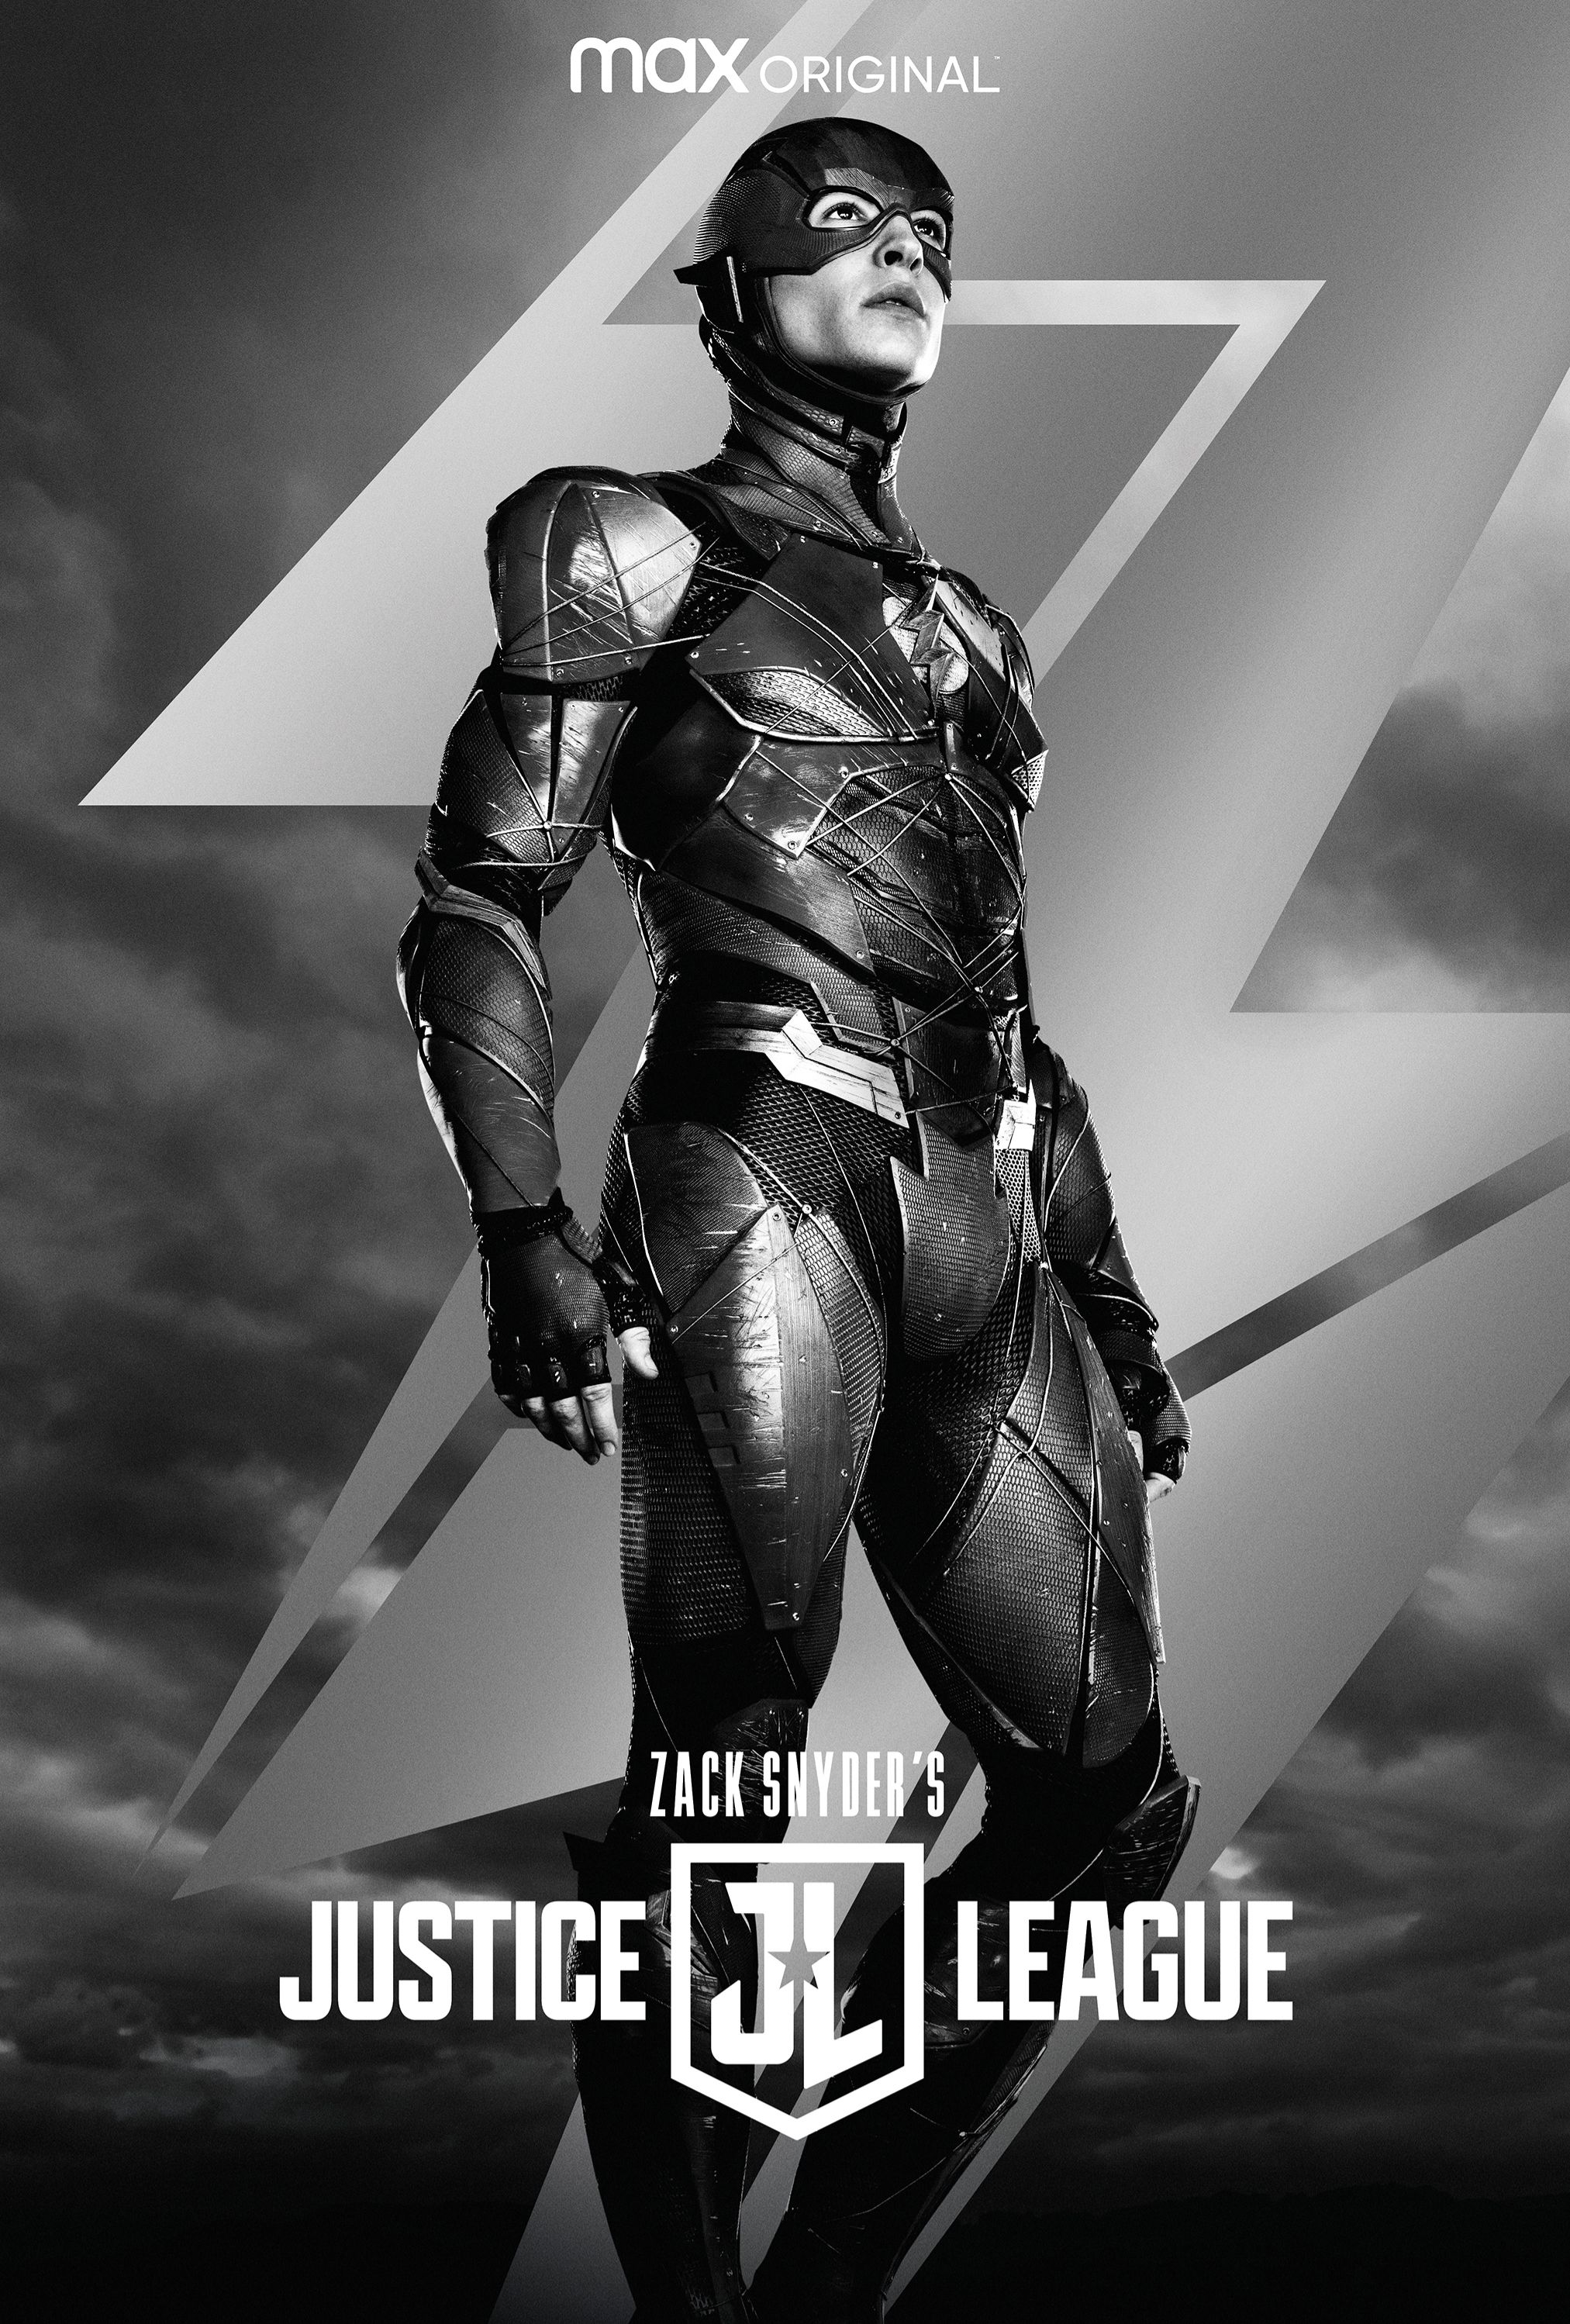 The Flash Zack Snyder's Justice League Poster